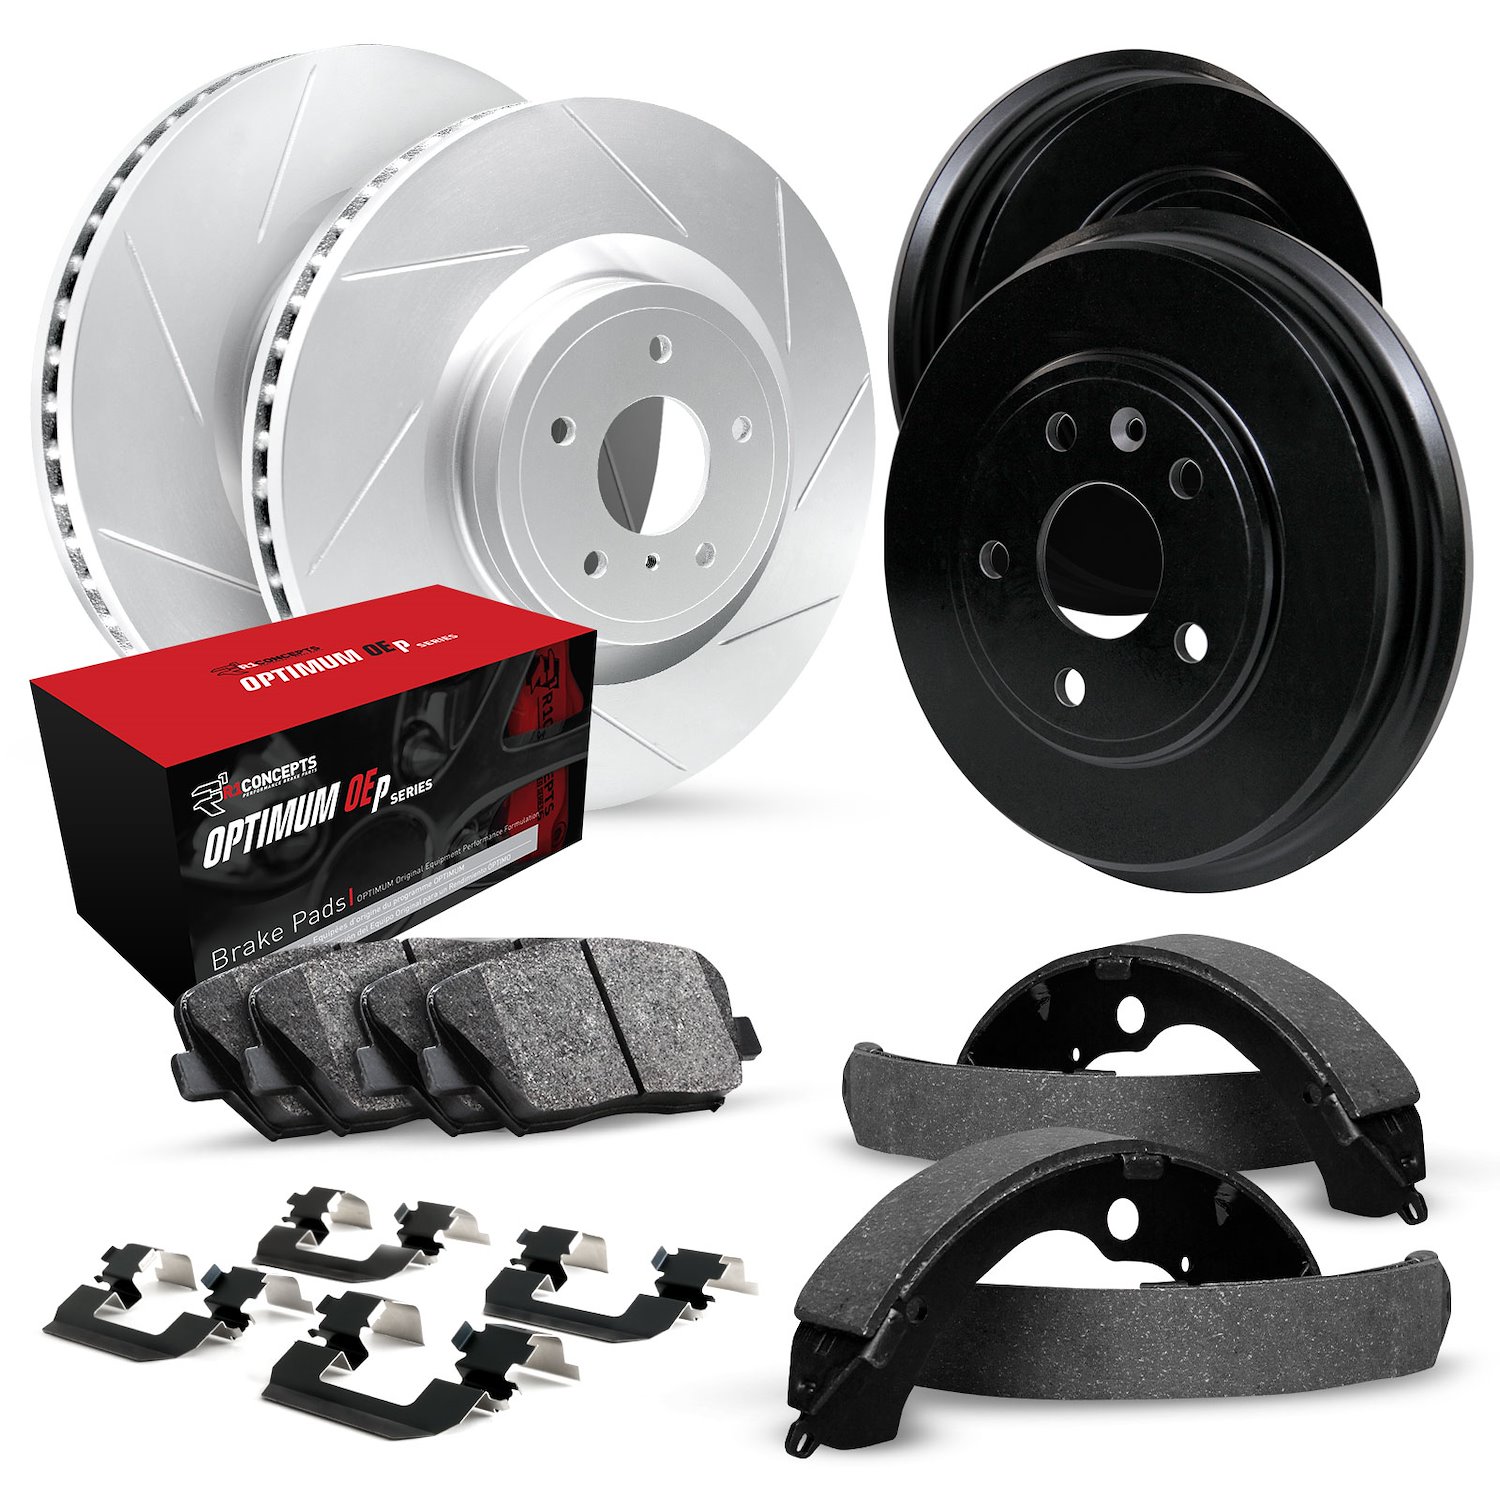 GEO-Carbon Slotted Brake Rotor & Drum Set w/Optimum OE Pads, Shoes, & Hardware, 1992-1993 GM, Position: Front & Rear